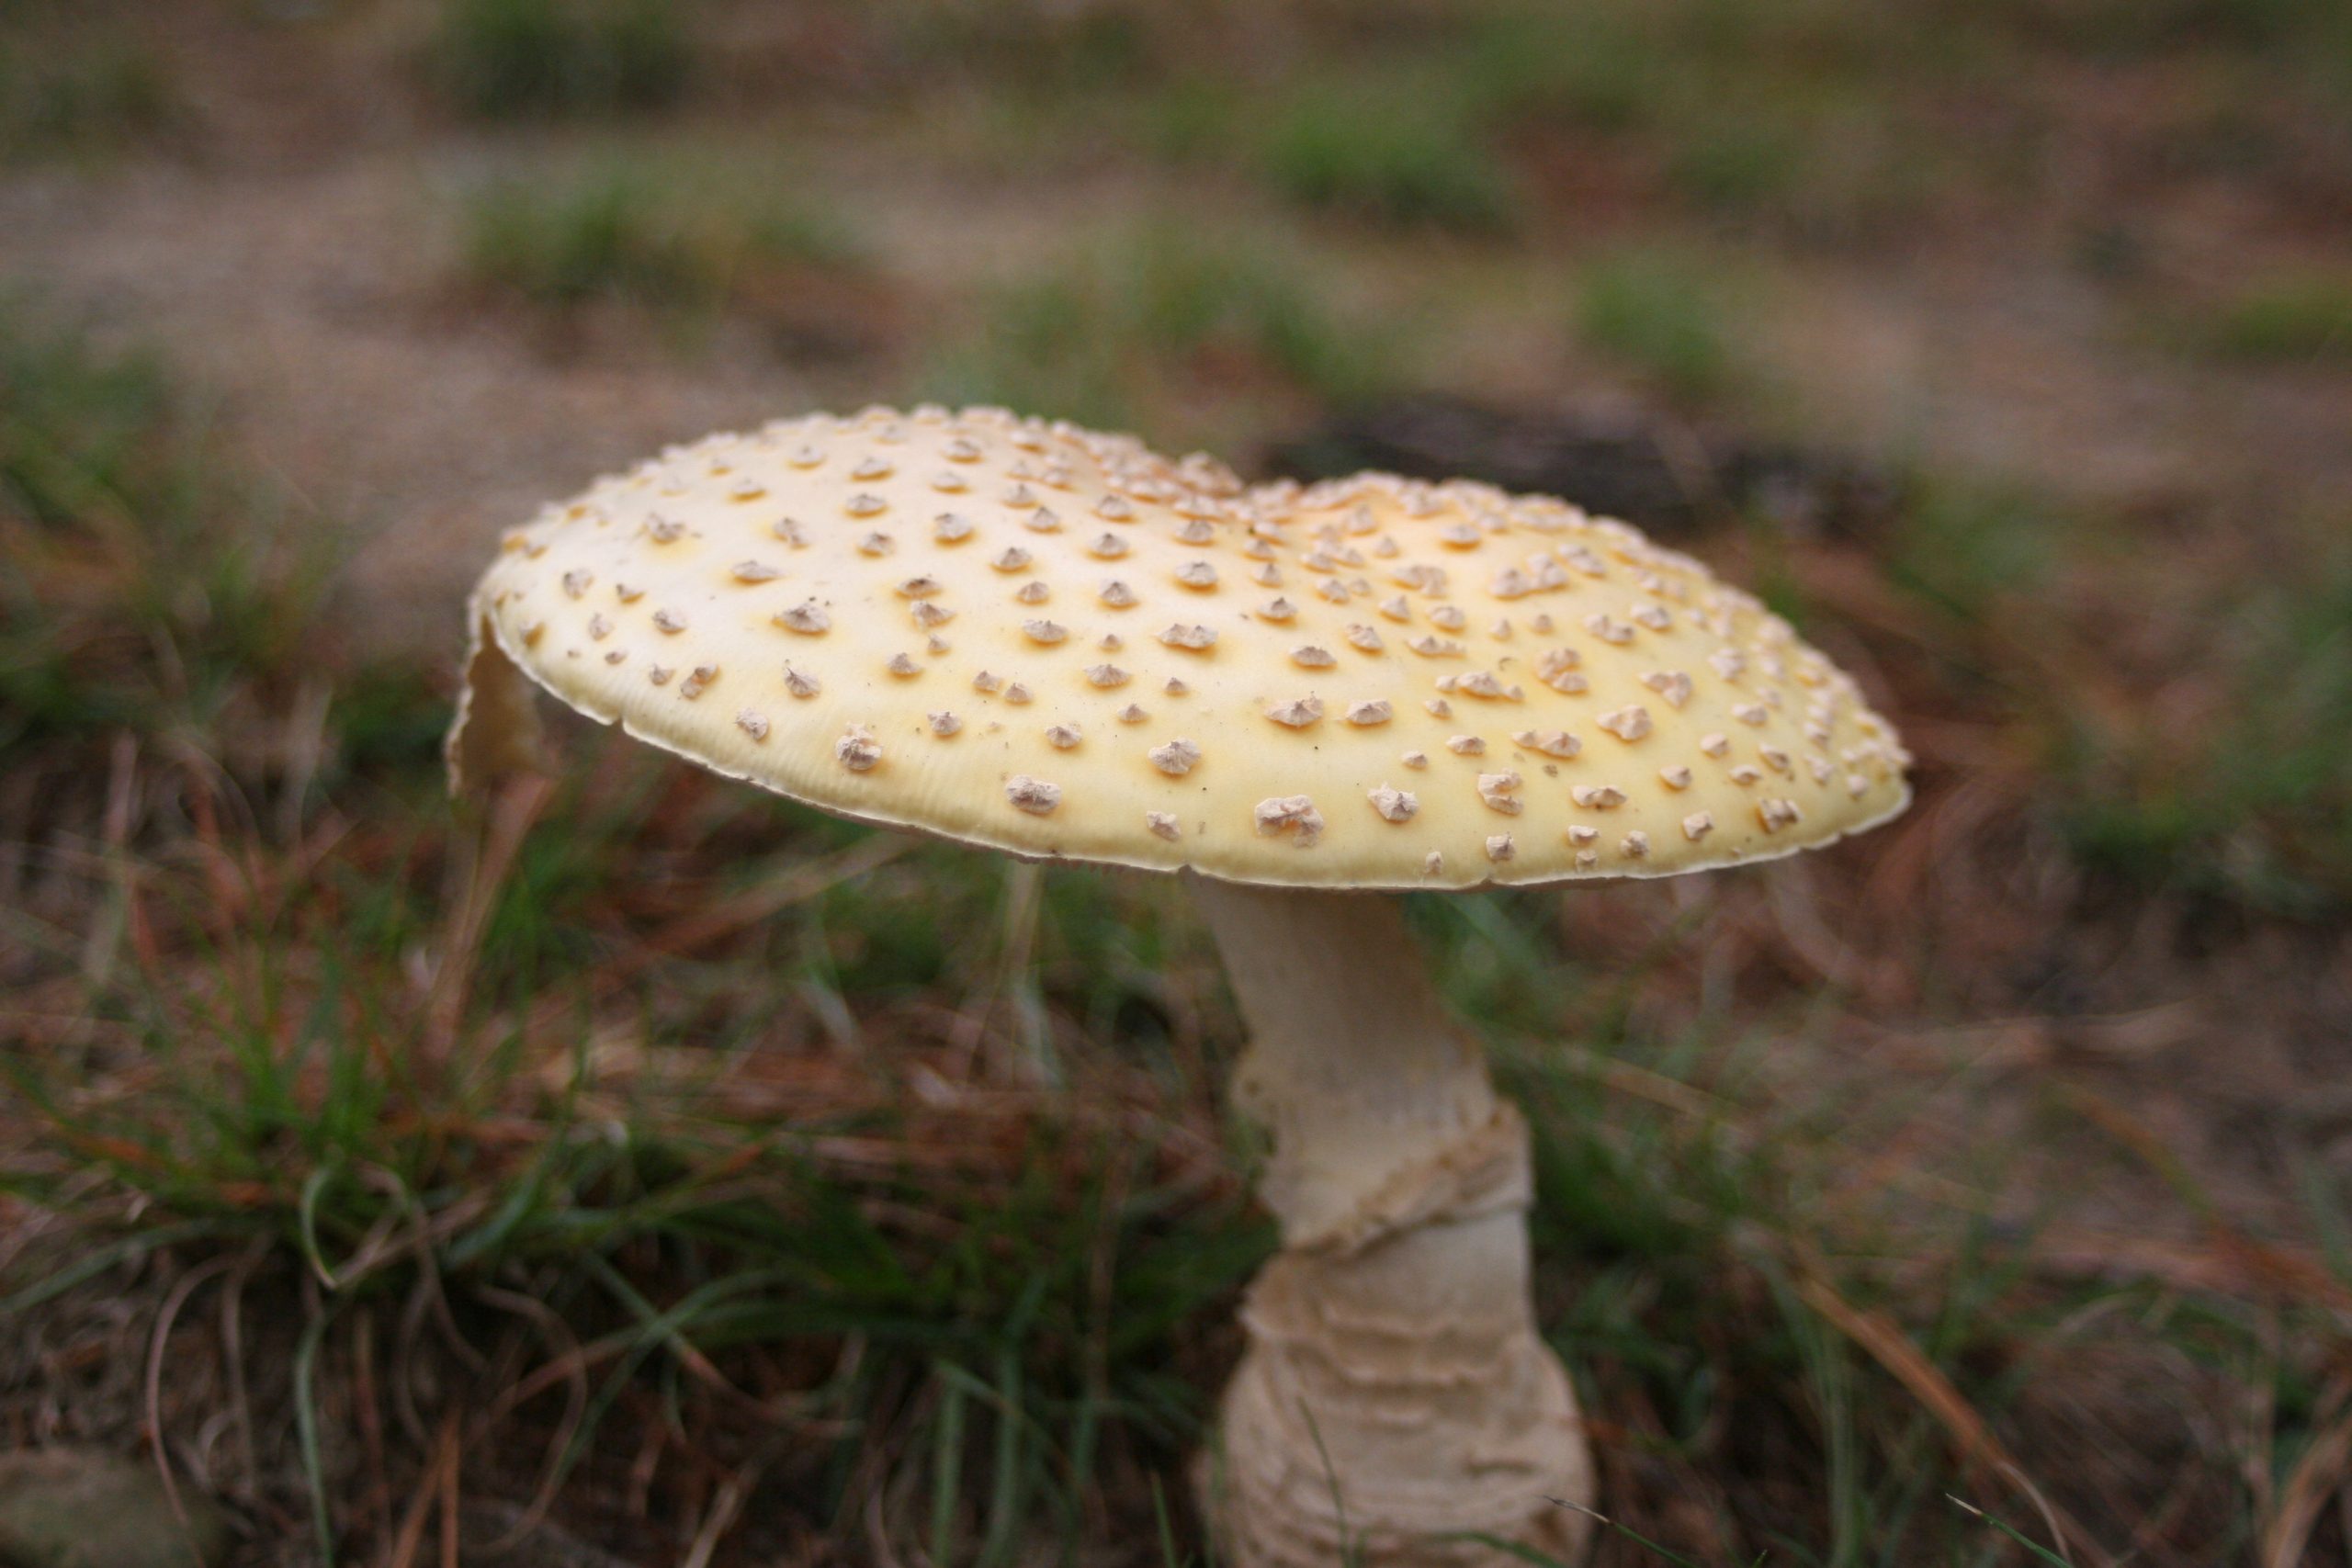 Mushroom (user submitted)